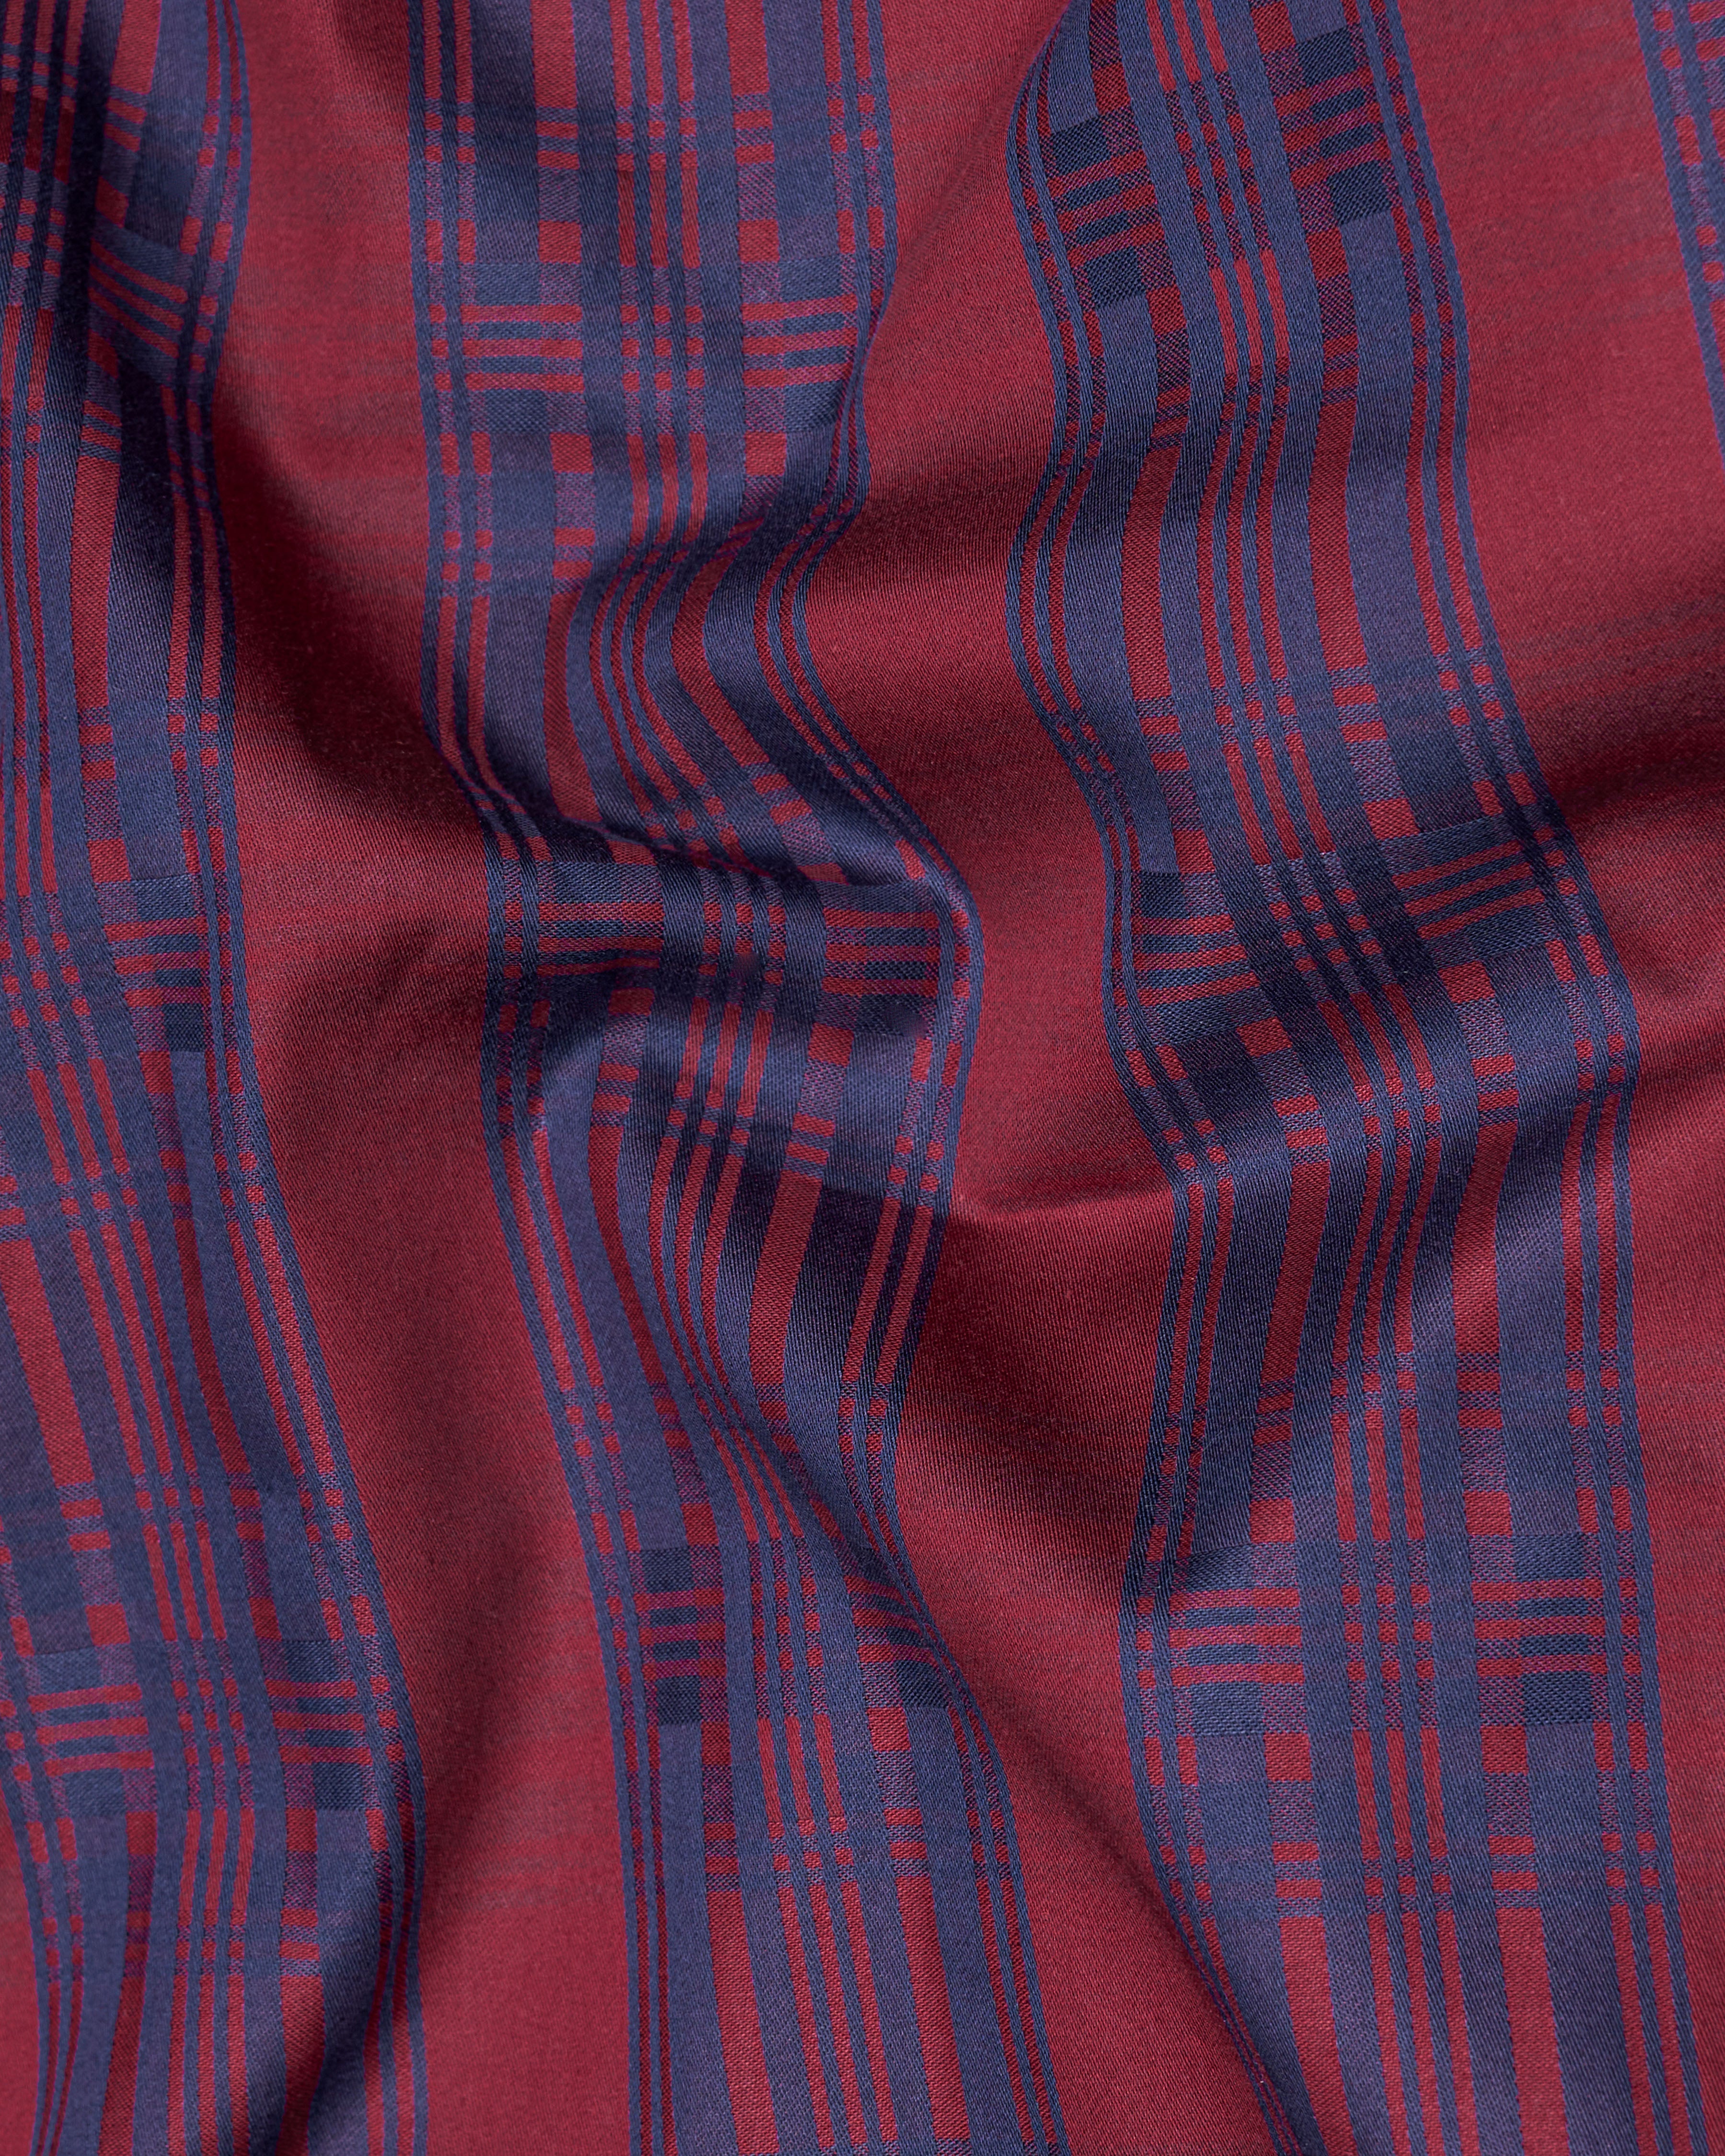 Auburn Red with Fiord Blue Jacquard Textured Giza Cotton Shirt 9611-CA-38,9611-CA-H-38,9611-CA-39,9611-CA-H-39,9611-CA-40,9611-CA-H-40,9611-CA-42,9611-CA-H-42,9611-CA-44,9611-CA-H-44,9611-CA-46,9611-CA-H-46,9611-CA-48,9611-CA-H-48,9611-CA-50,9611-CA-H-50,9611-CA-52,9611-CA-H-52